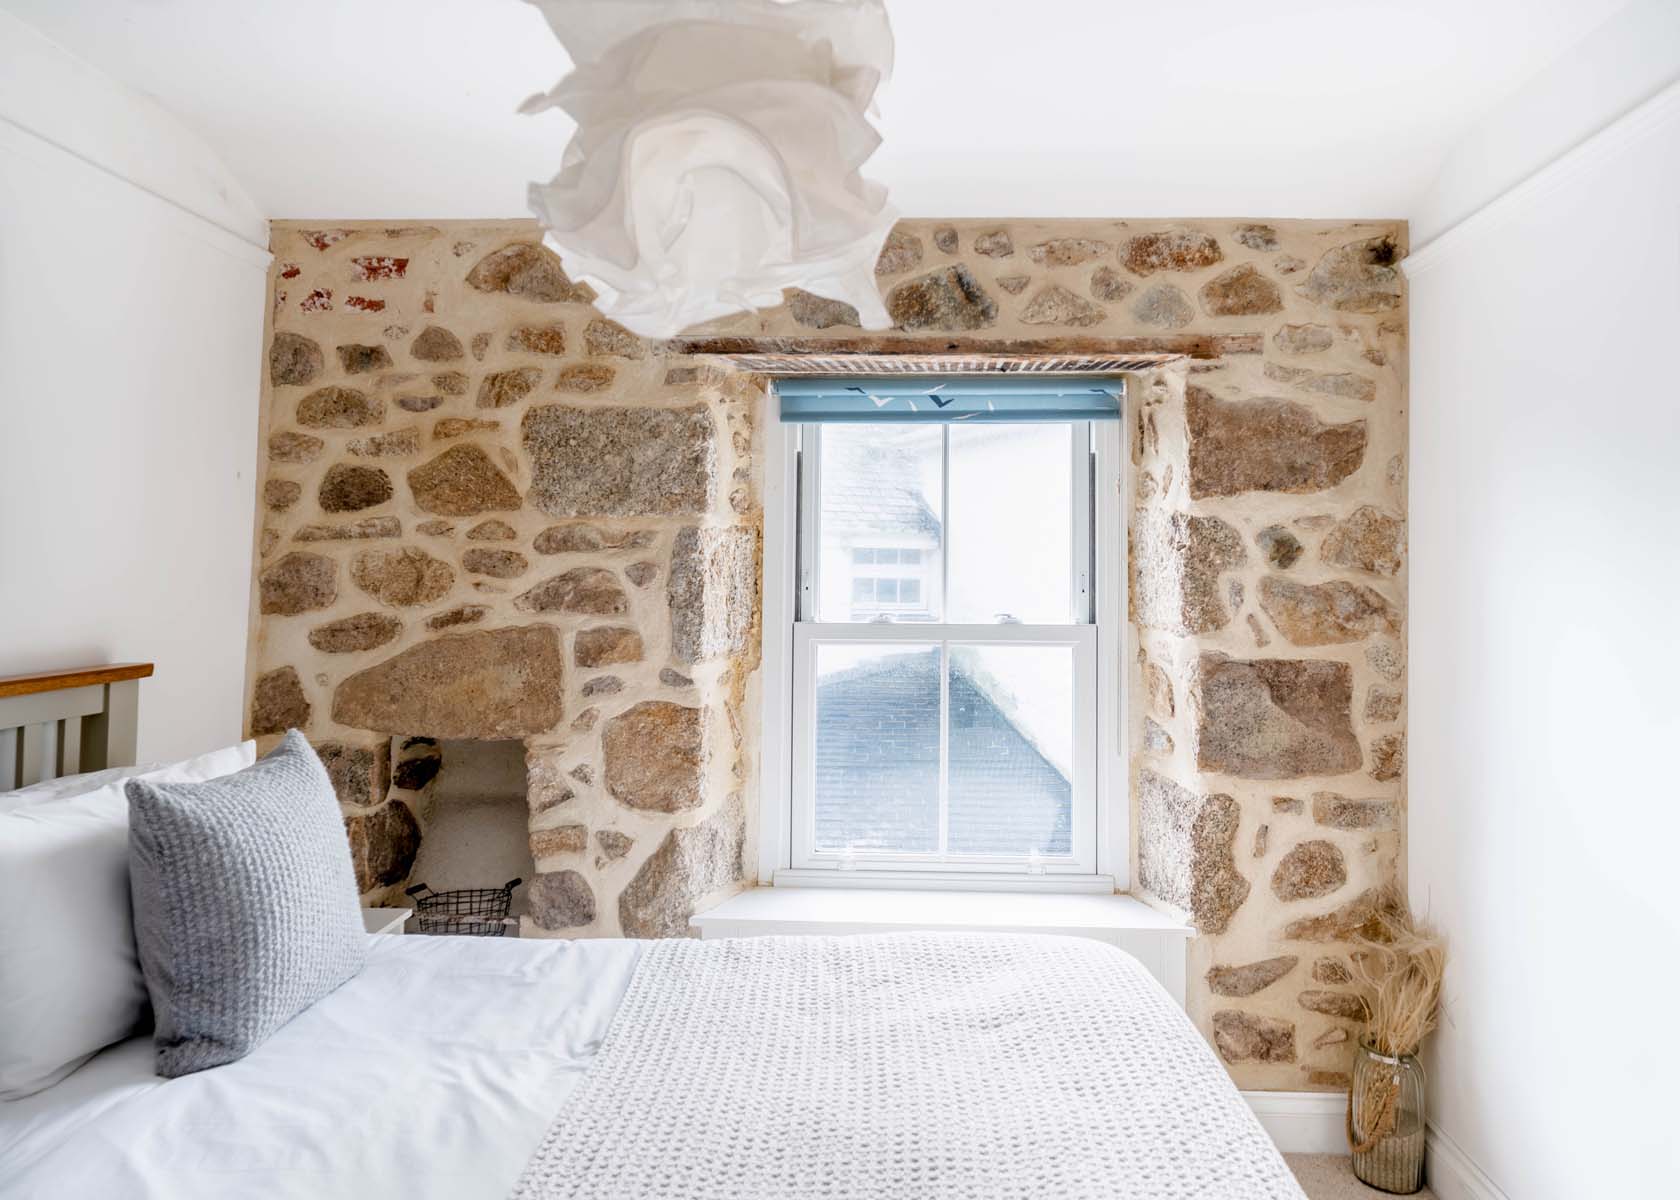 Simple modern bedroom with exposed stone walls